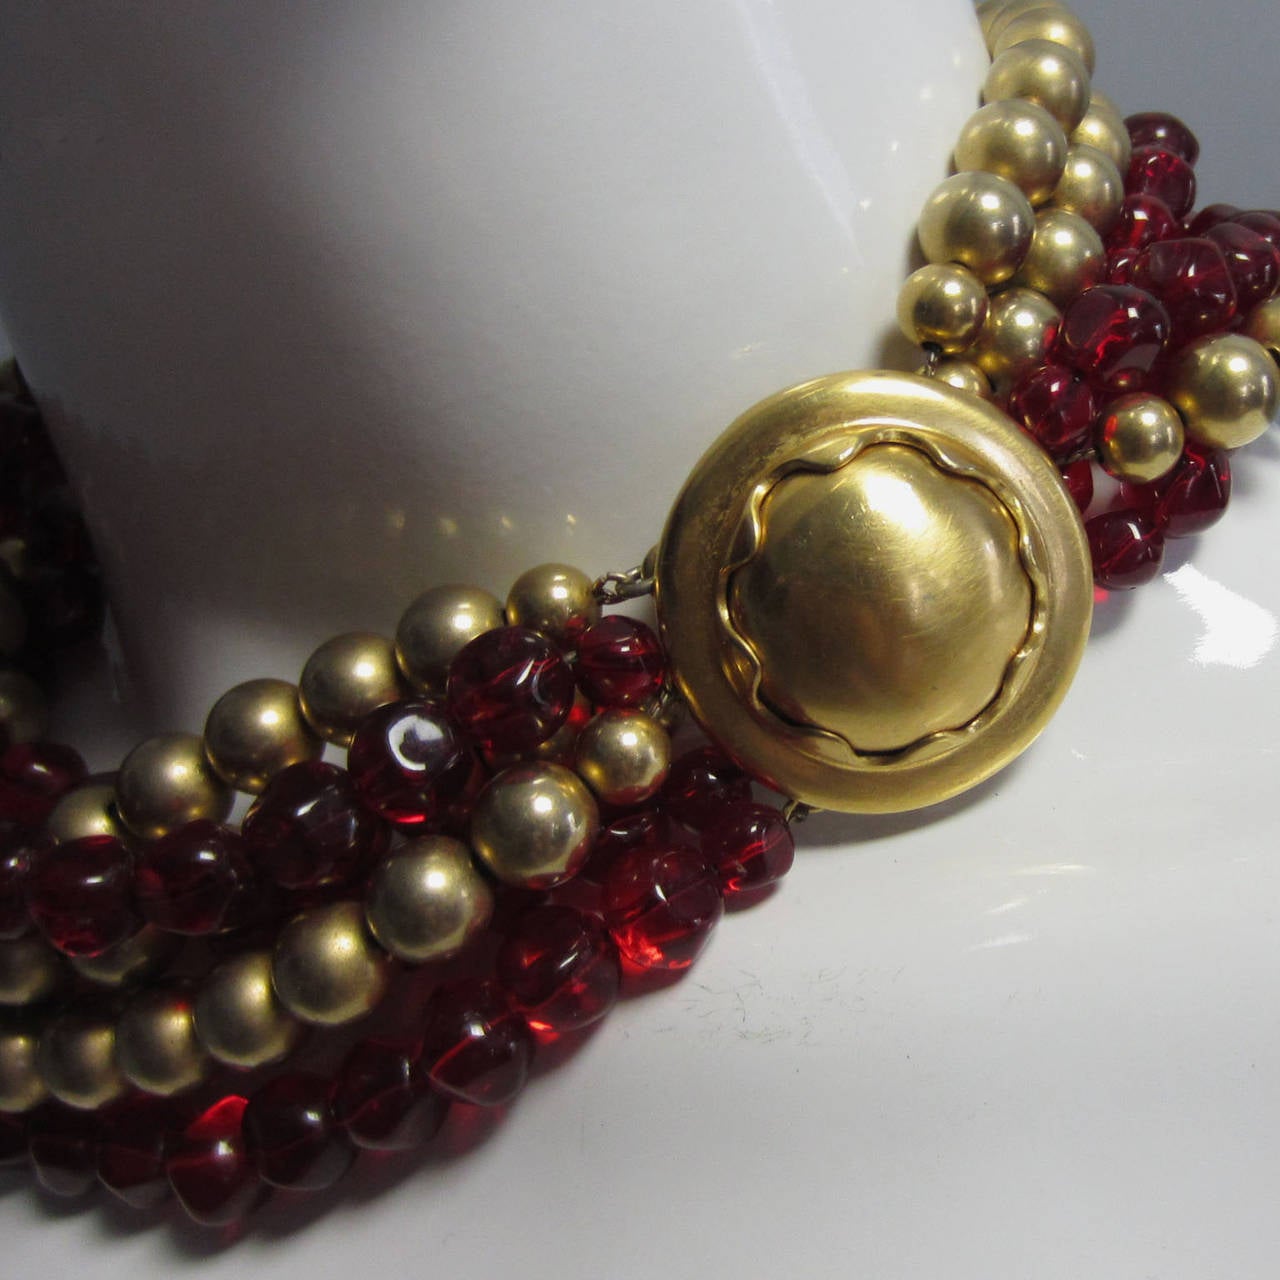 This necklace features 3 strands of red glass beads and 3 strands of gold beads. The strands intertwine when worn, creating a layered effect. There is a gold, articulated circe clasp closure that can be worn to the back, side or front as a pendant.